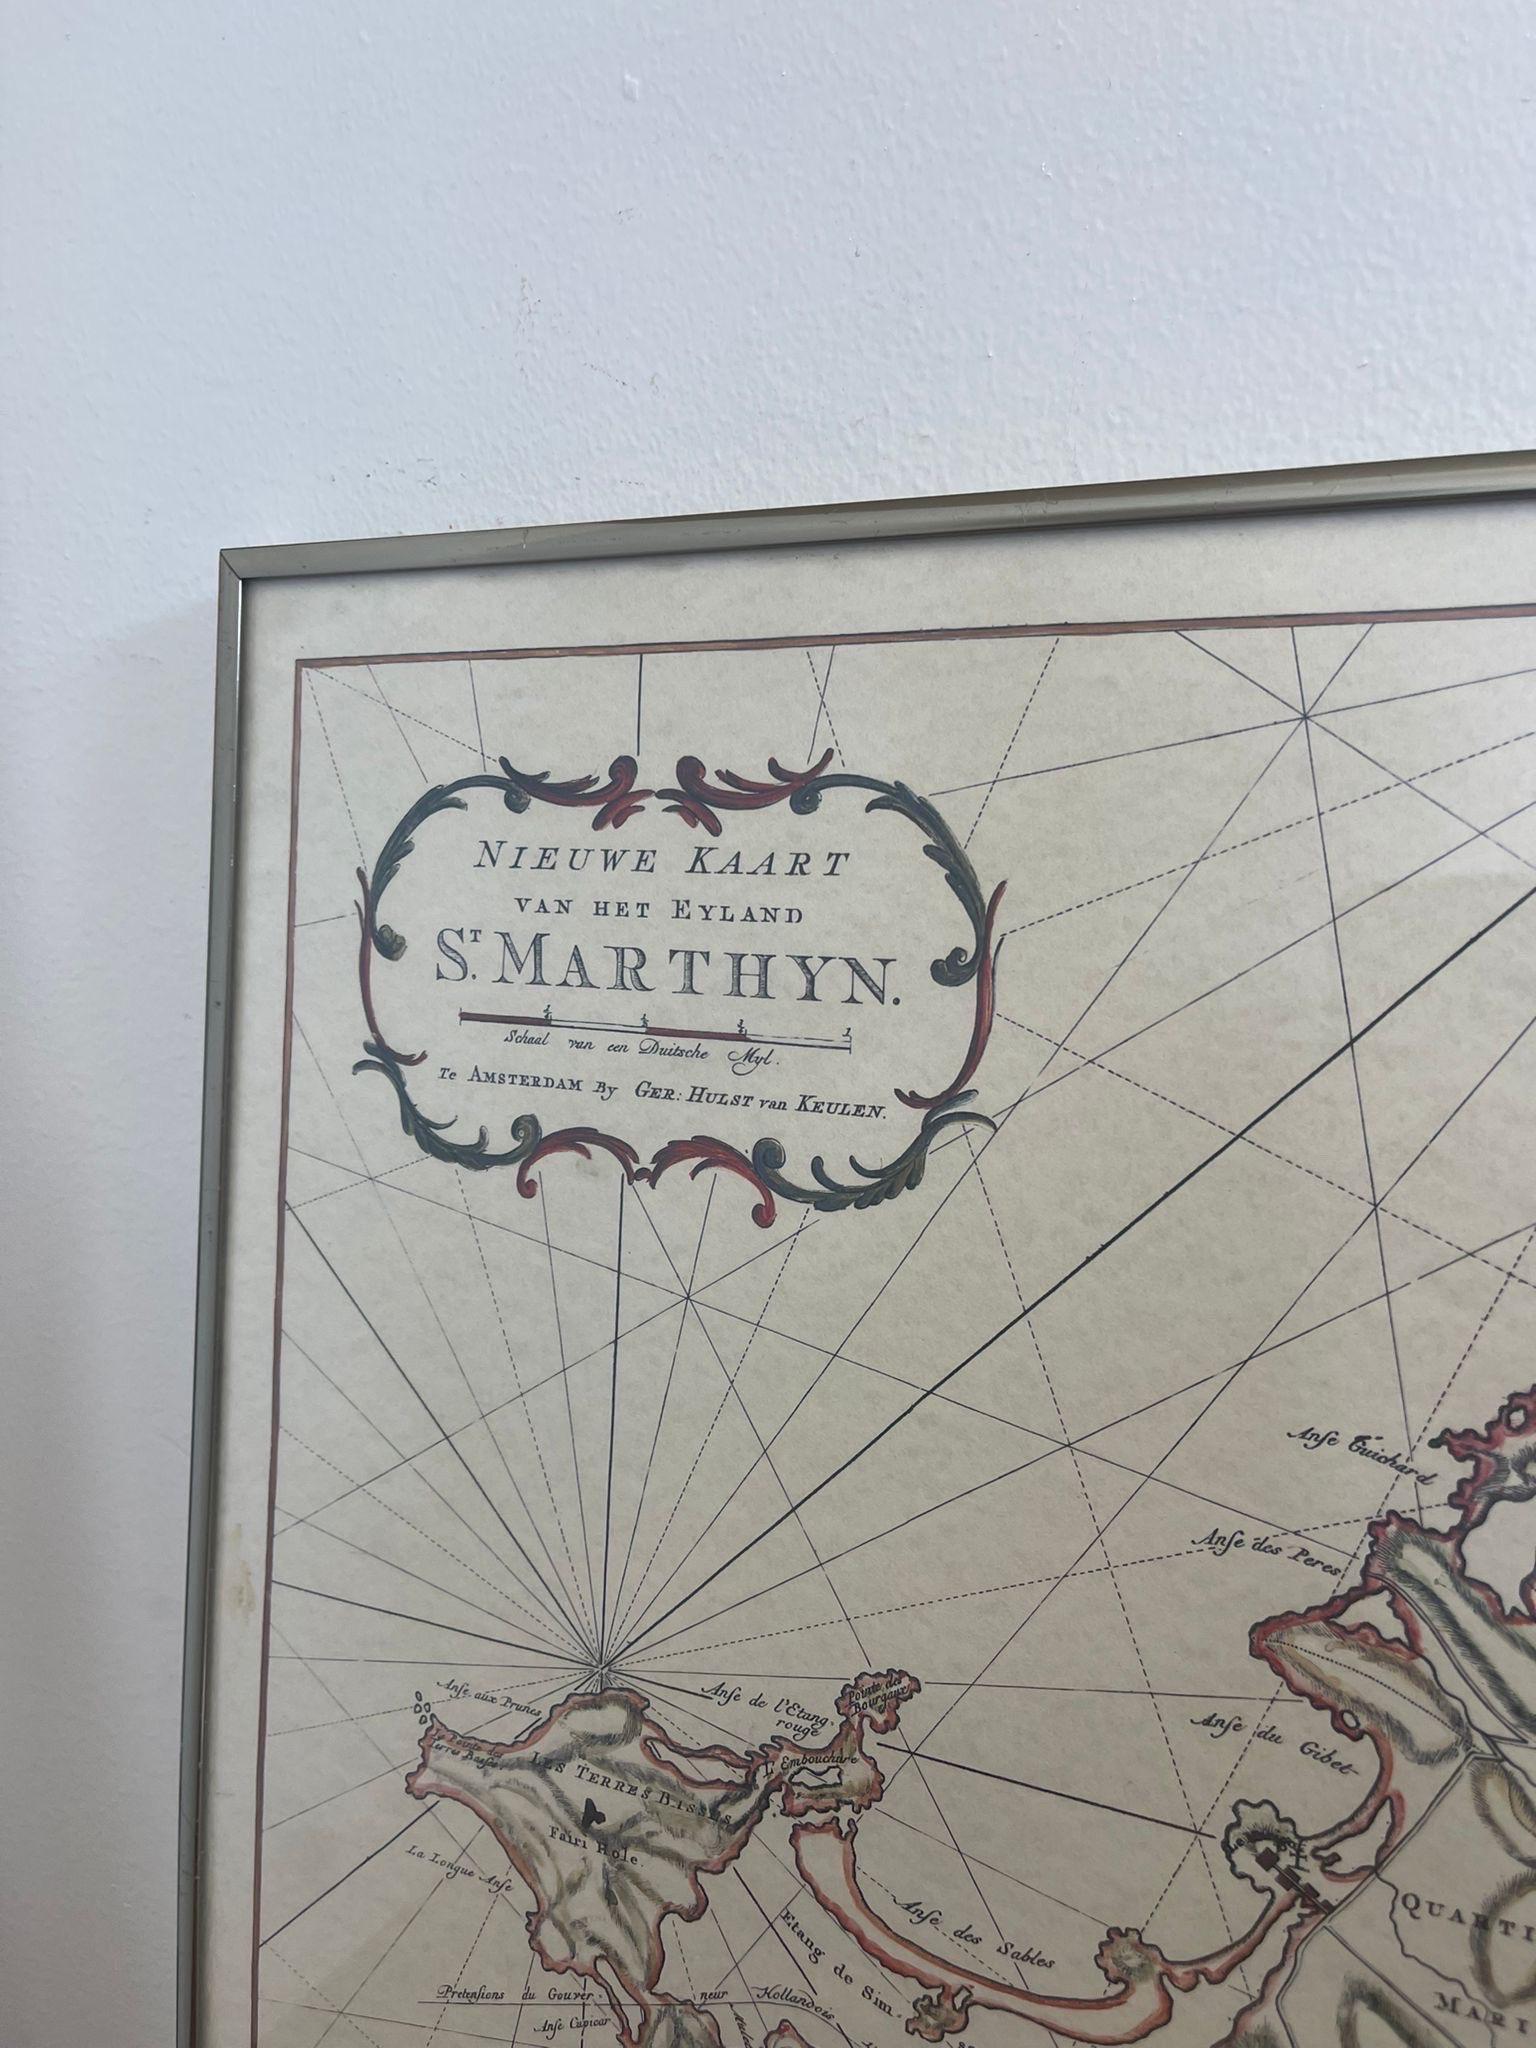 Metal Vintage Map Print of Saint Martin Island in the Caribbean Sea, Written in Dutch. For Sale